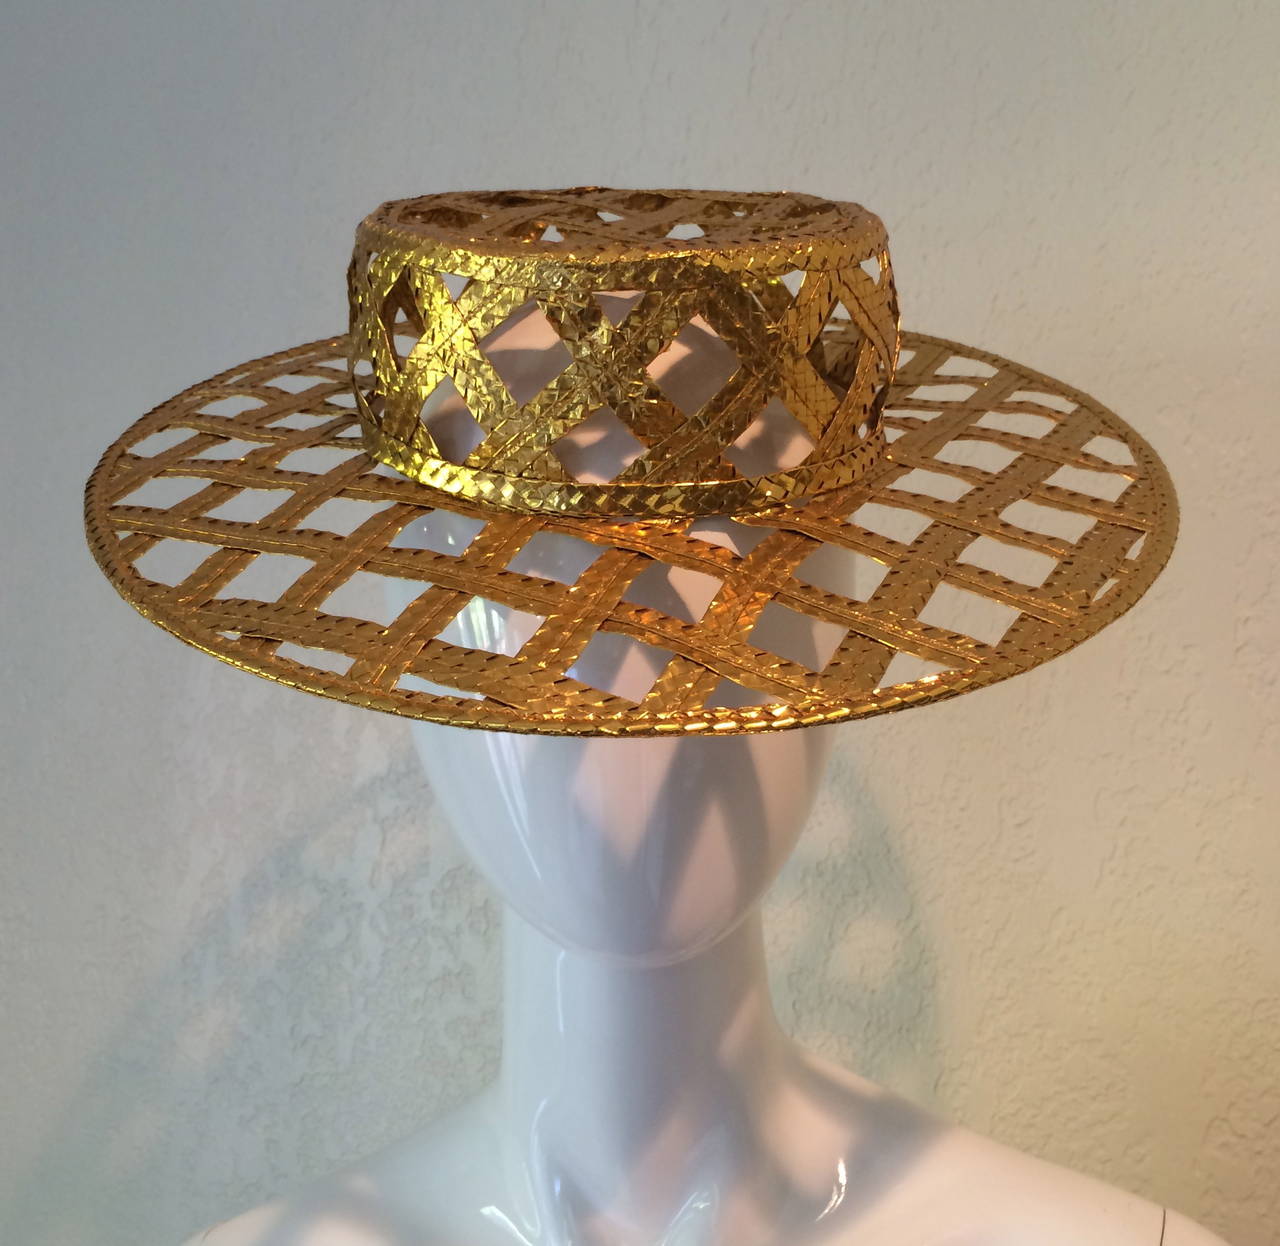 New with tags. Fabulous Chanel gold  lattice hat. The gold is woven and ultra shiny with a foil effect. From Spring of 1990.  Purchased from the West Palm Beach Chanel Boutique over 23 years ago. Please see last photo for the Chanel advertisement 